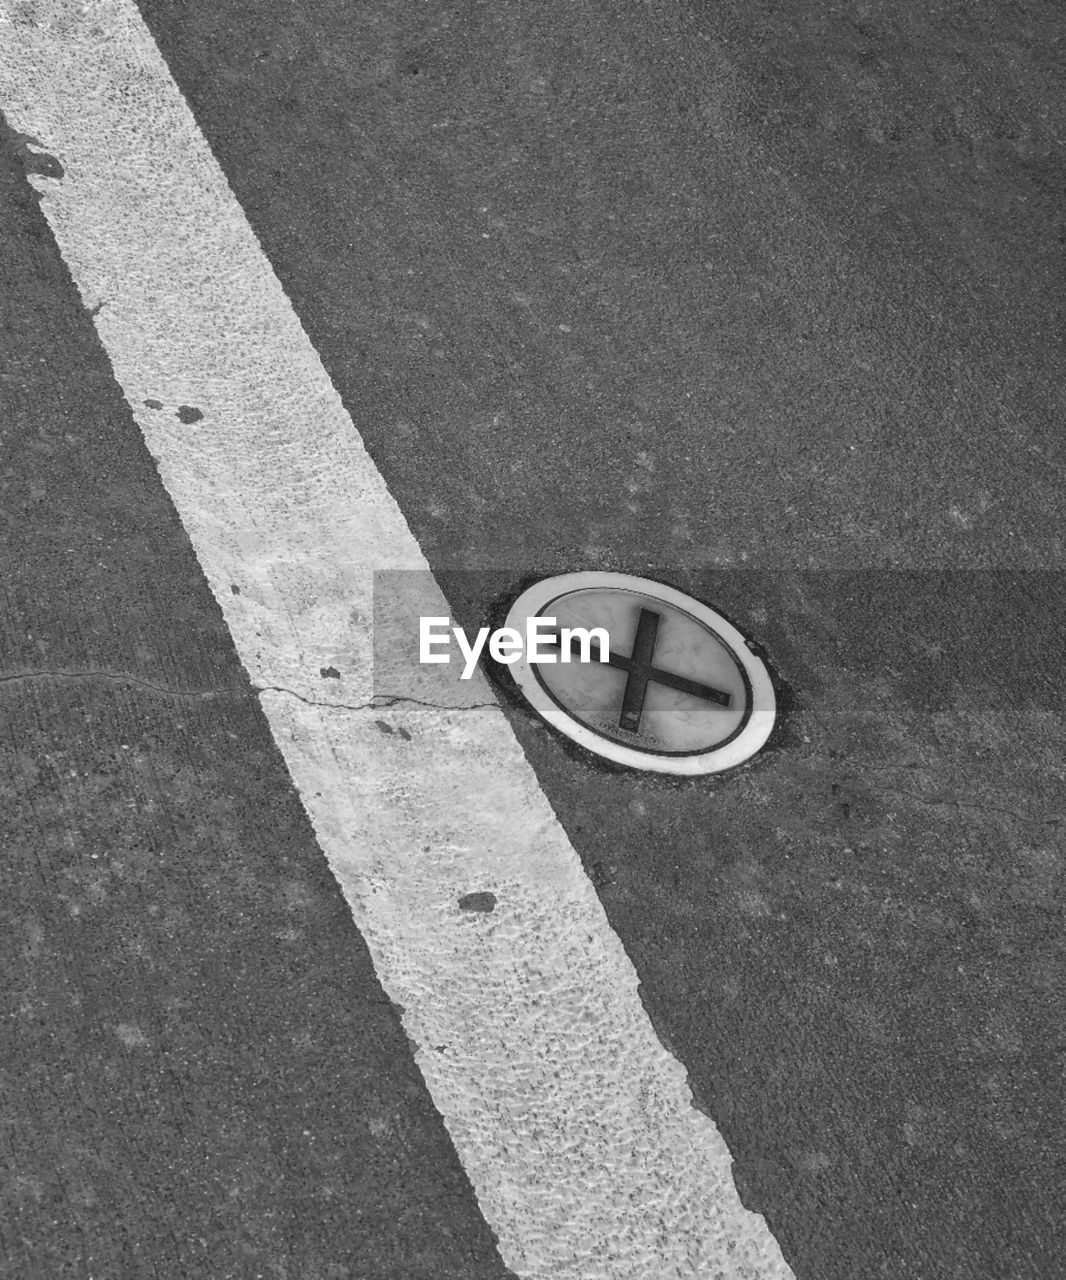 white, black, road, high angle view, symbol, line, transportation, black and white, circle, asphalt, road marking, sign, street, marking, day, monochrome, city, monochrome photography, no people, road surface, shadow, outdoors, floor, number, flooring, guidance, lane, geometric shape, communication